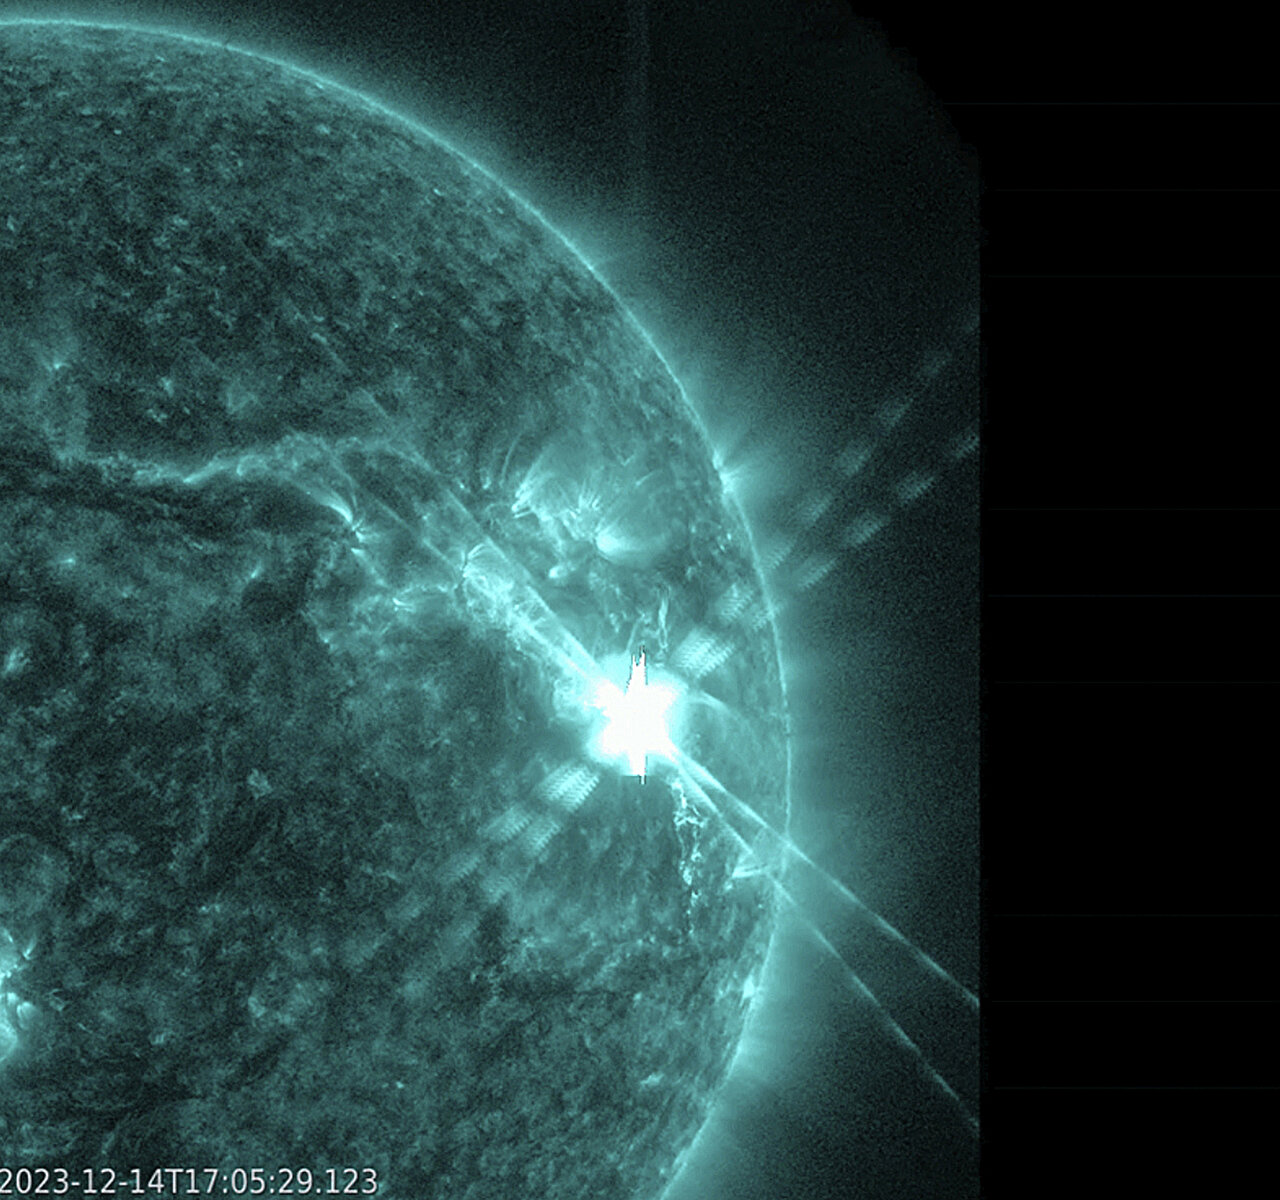 Largest solar flare in recent years causes temporary disruption to Earth’s radio signals.